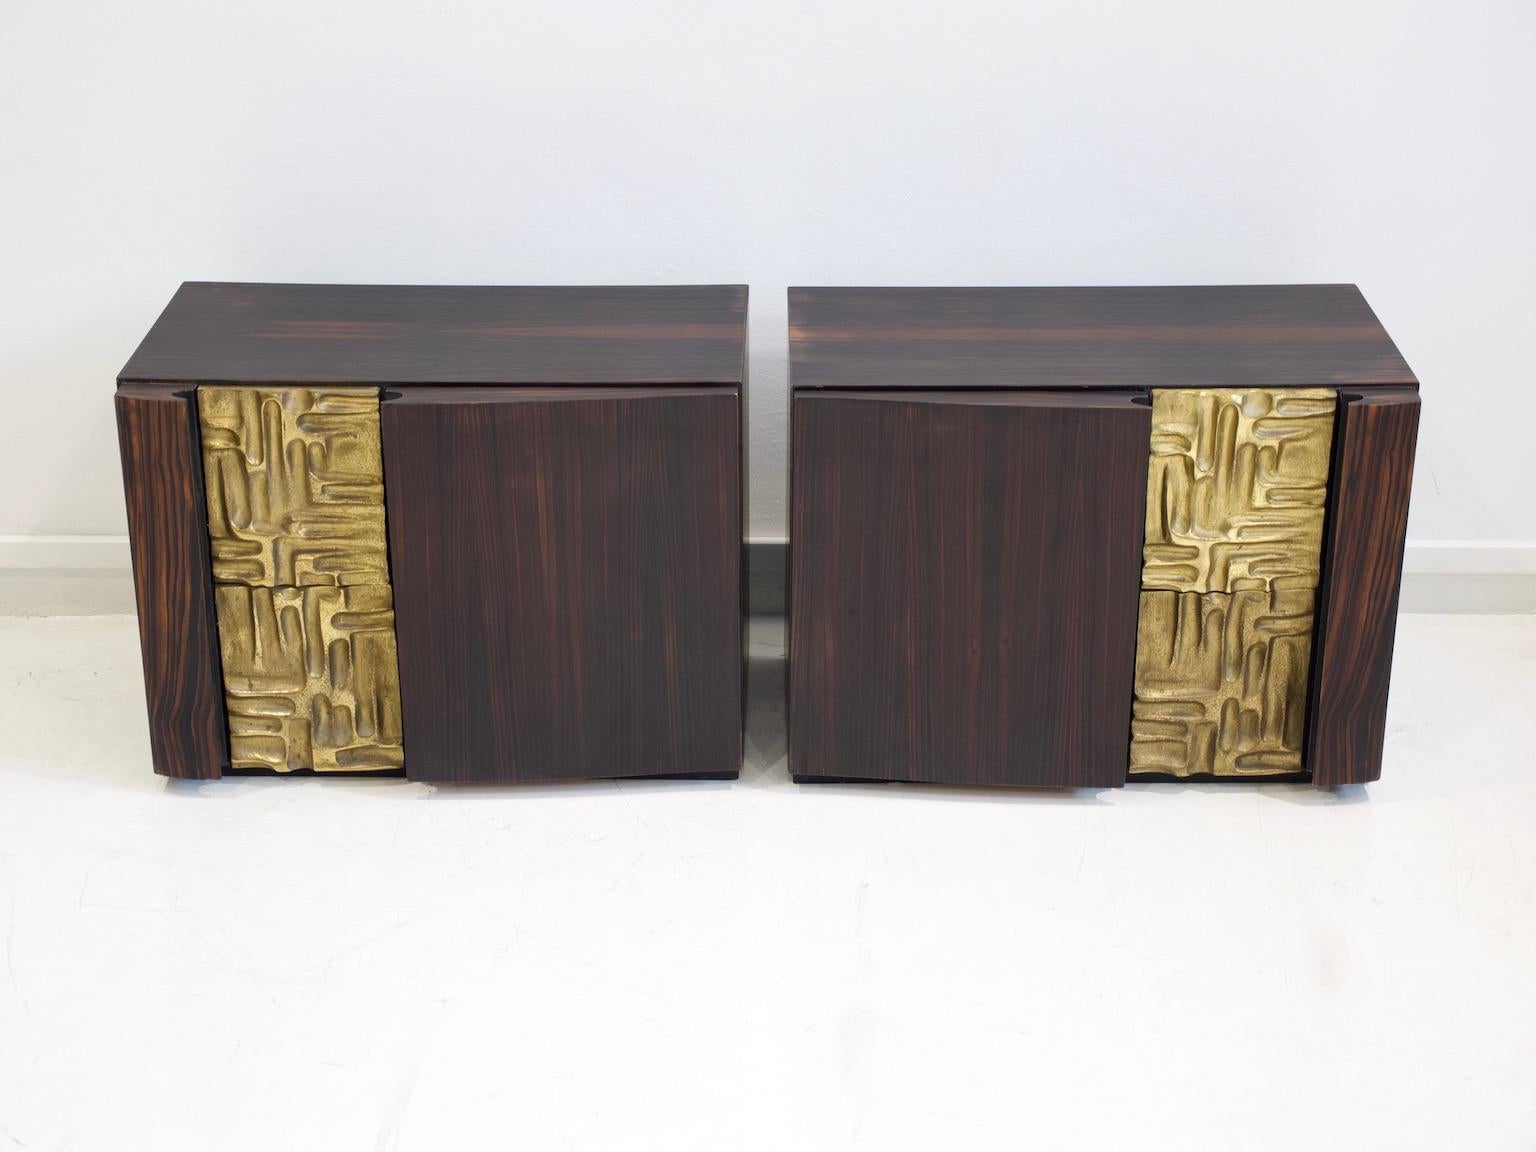 Two credenzas or bedside tables model Cinzia. Made of Macassar ebony with beautiful bronze casting. Produced by Frigerio di Desio, circa 1975.